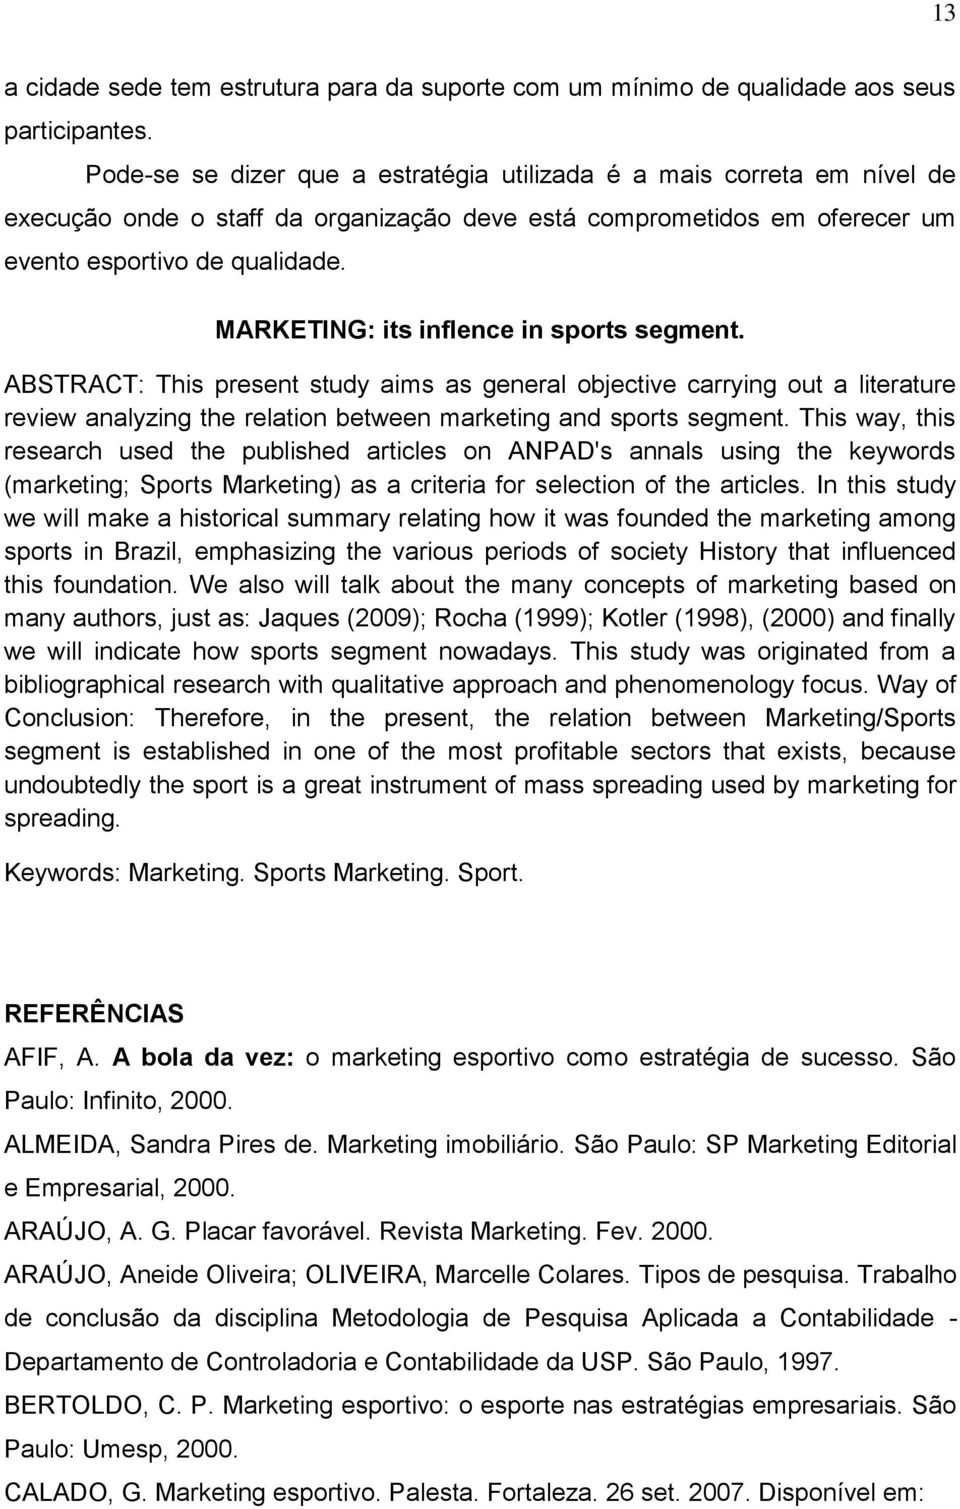 MARKETING: its inflence in sports segment. ABSTRACT: This present study aims as general objective carrying out a literature review analyzing the relation between marketing and sports segment.